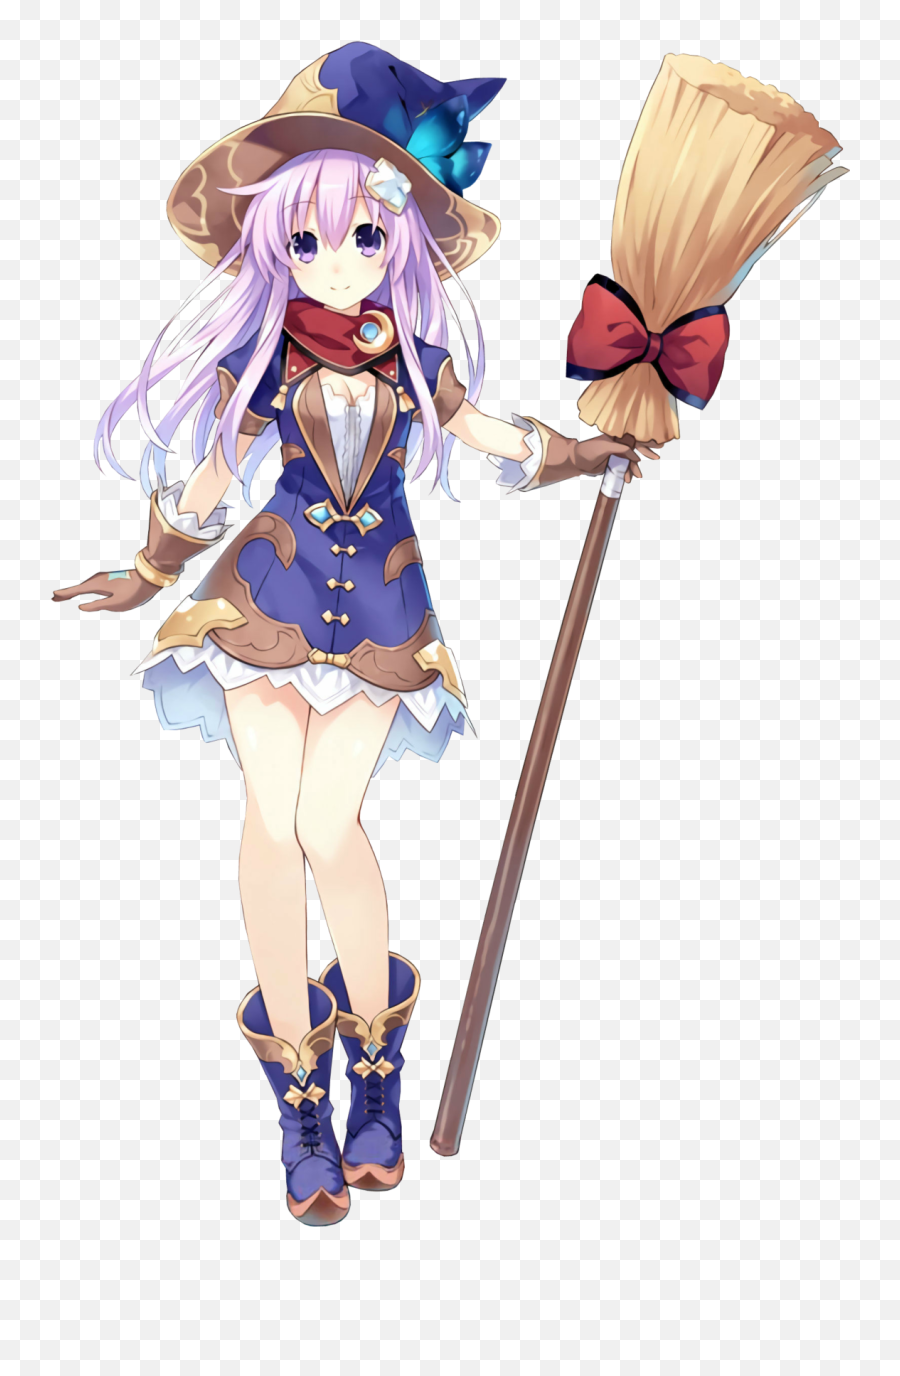 Kevin David Profile Disqus - Hyperdimension Neptunia Mages Fan Art Png,Women's Face Summoners Icon